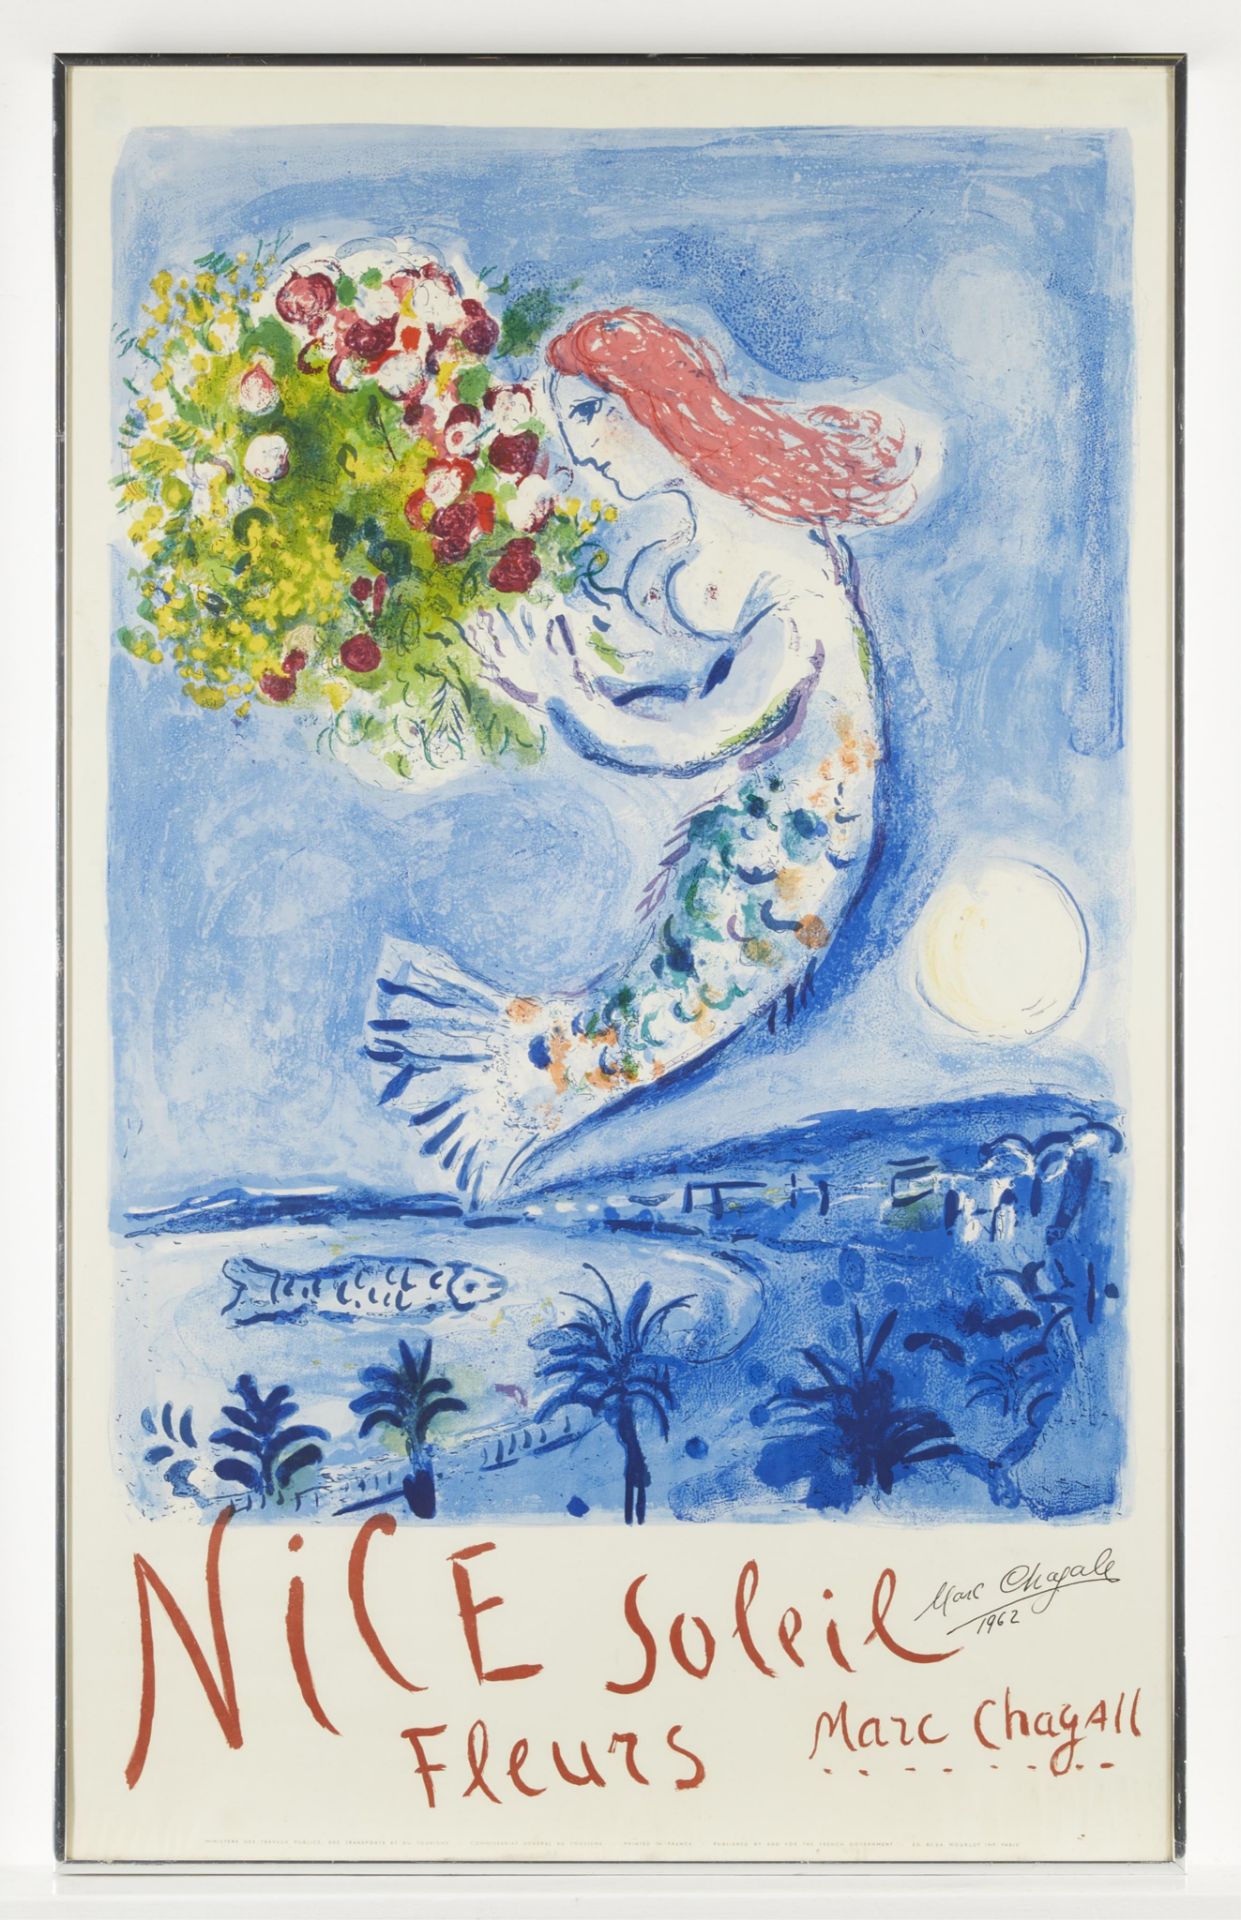 Marc Chagall "Bay of Angels" Signed Poster 1962 - Image 3 of 7